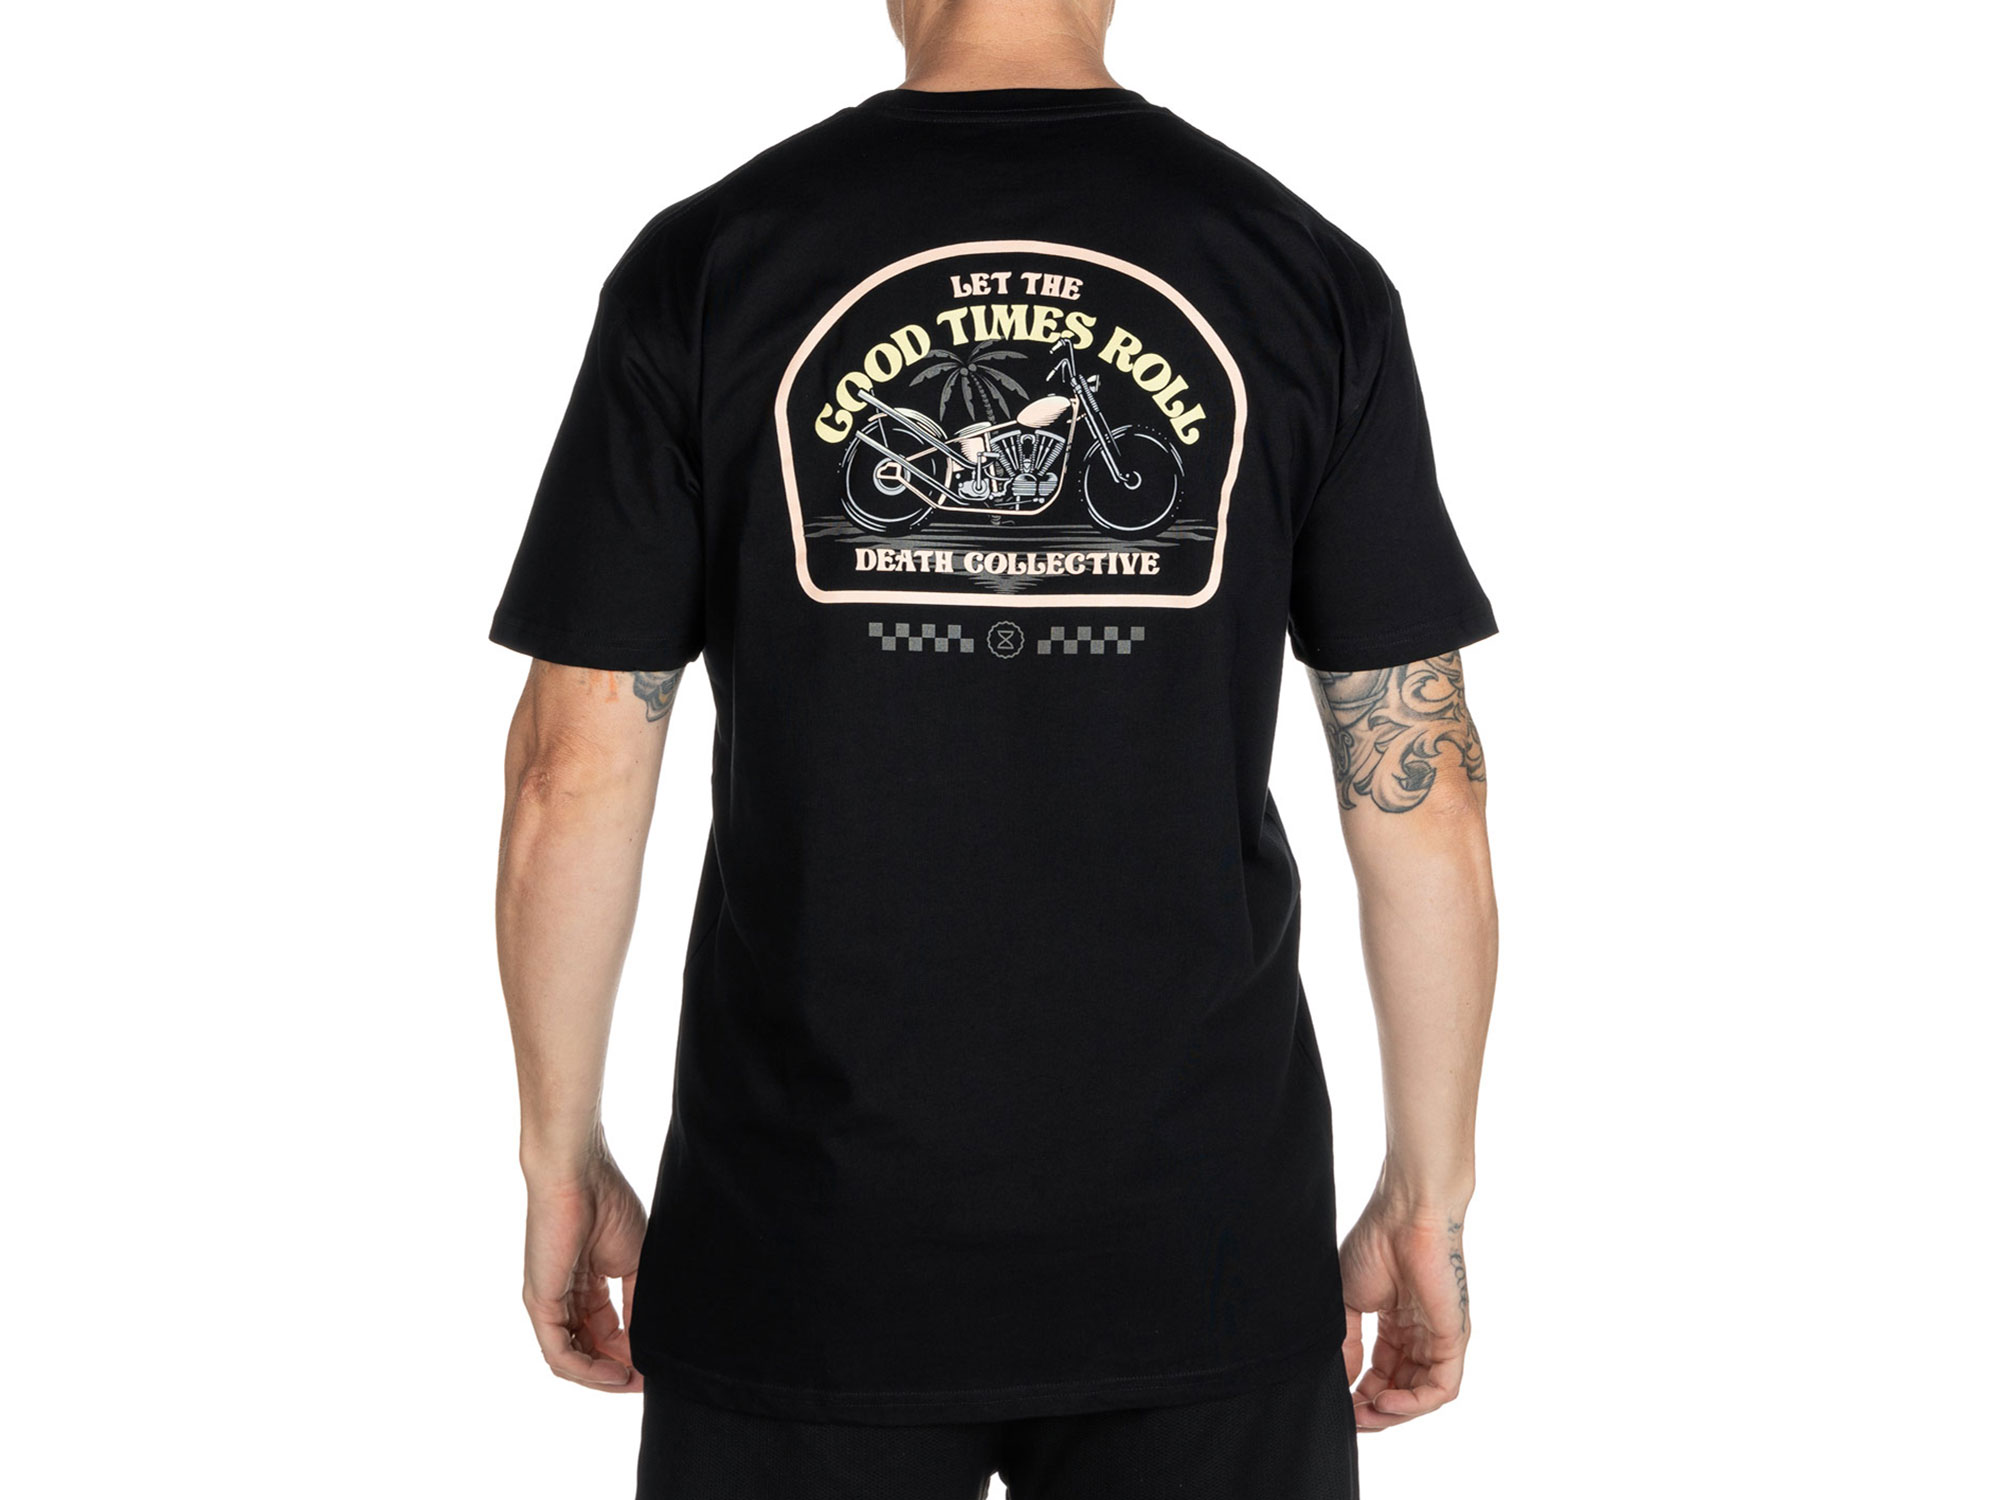 Death Collective Times T-Shirt – Black. X-Large